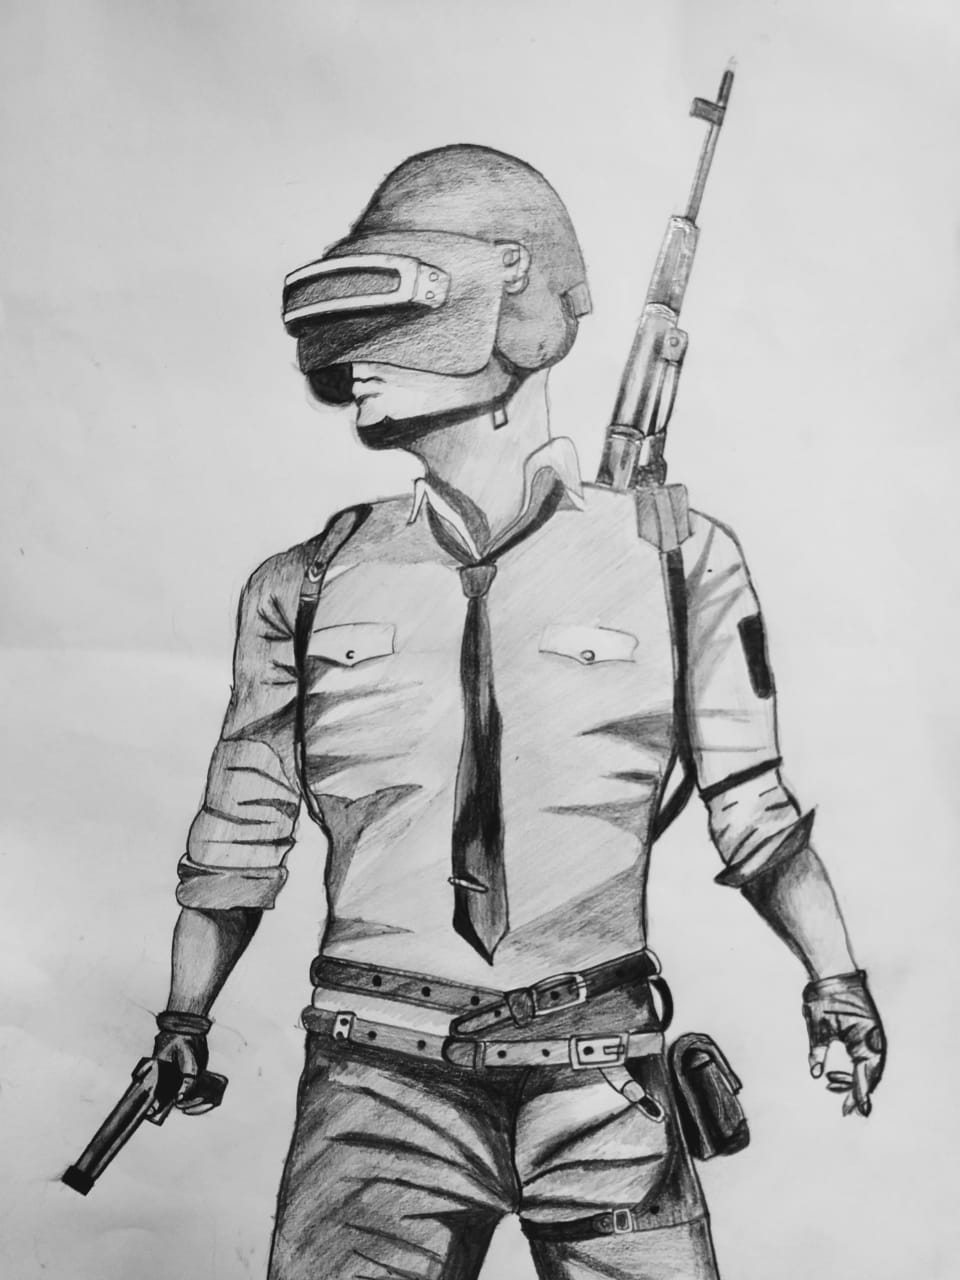 PUBG Drawing, Pencil, Sketch, Colorful, Realistic Art Images Drawing